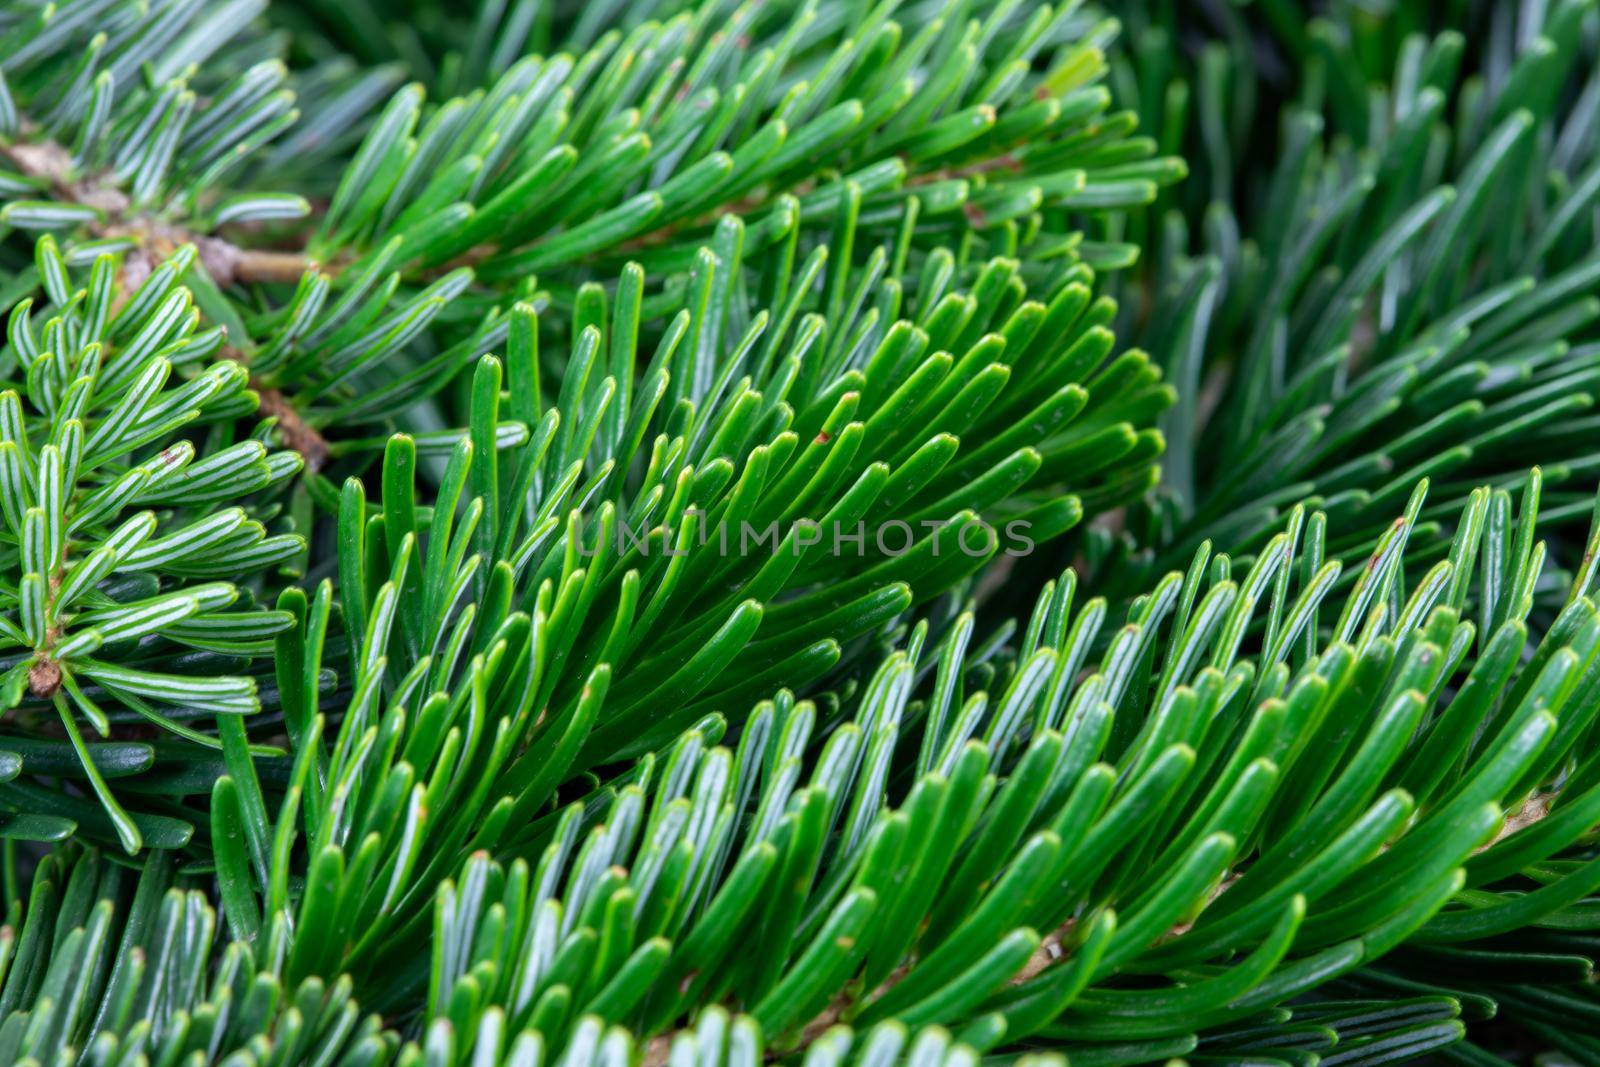 Christmas motif, texture, wallpaper, background with close-up of Nordmann fir branches